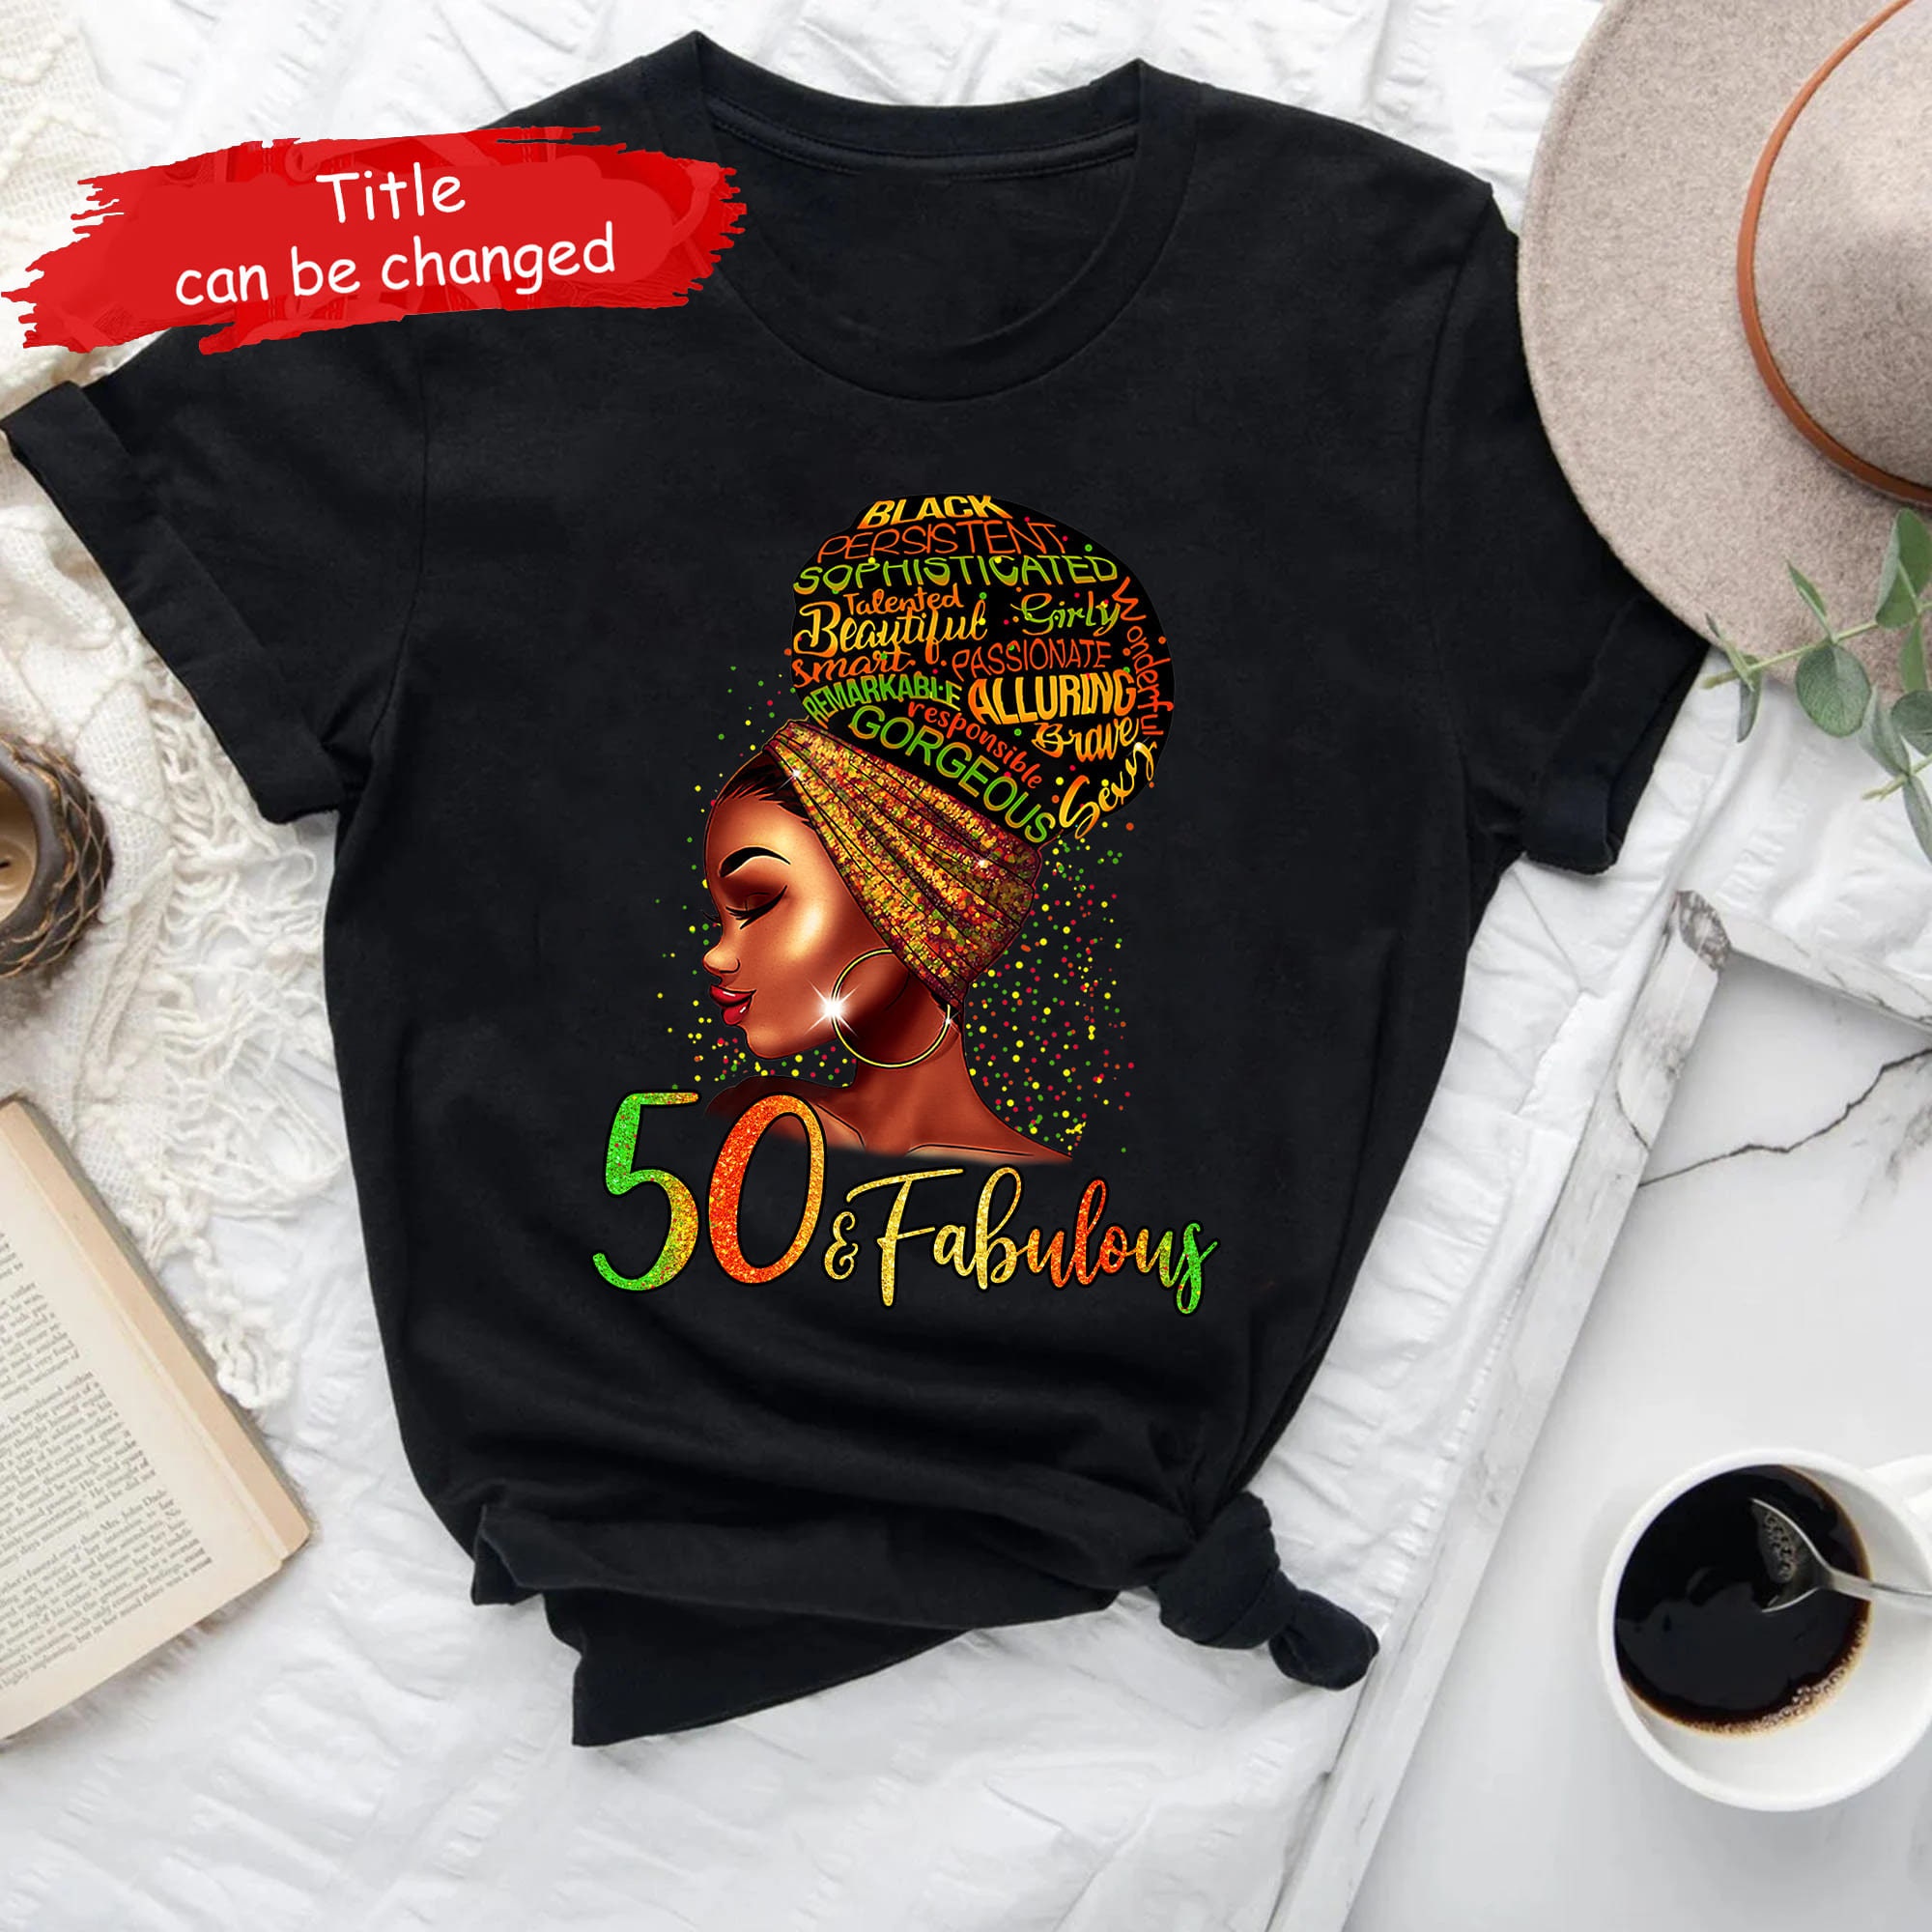 Discover 50 and Fabulous T-shirt, 50 and Fabulous Shirt, 50th Birthday T-Shirt